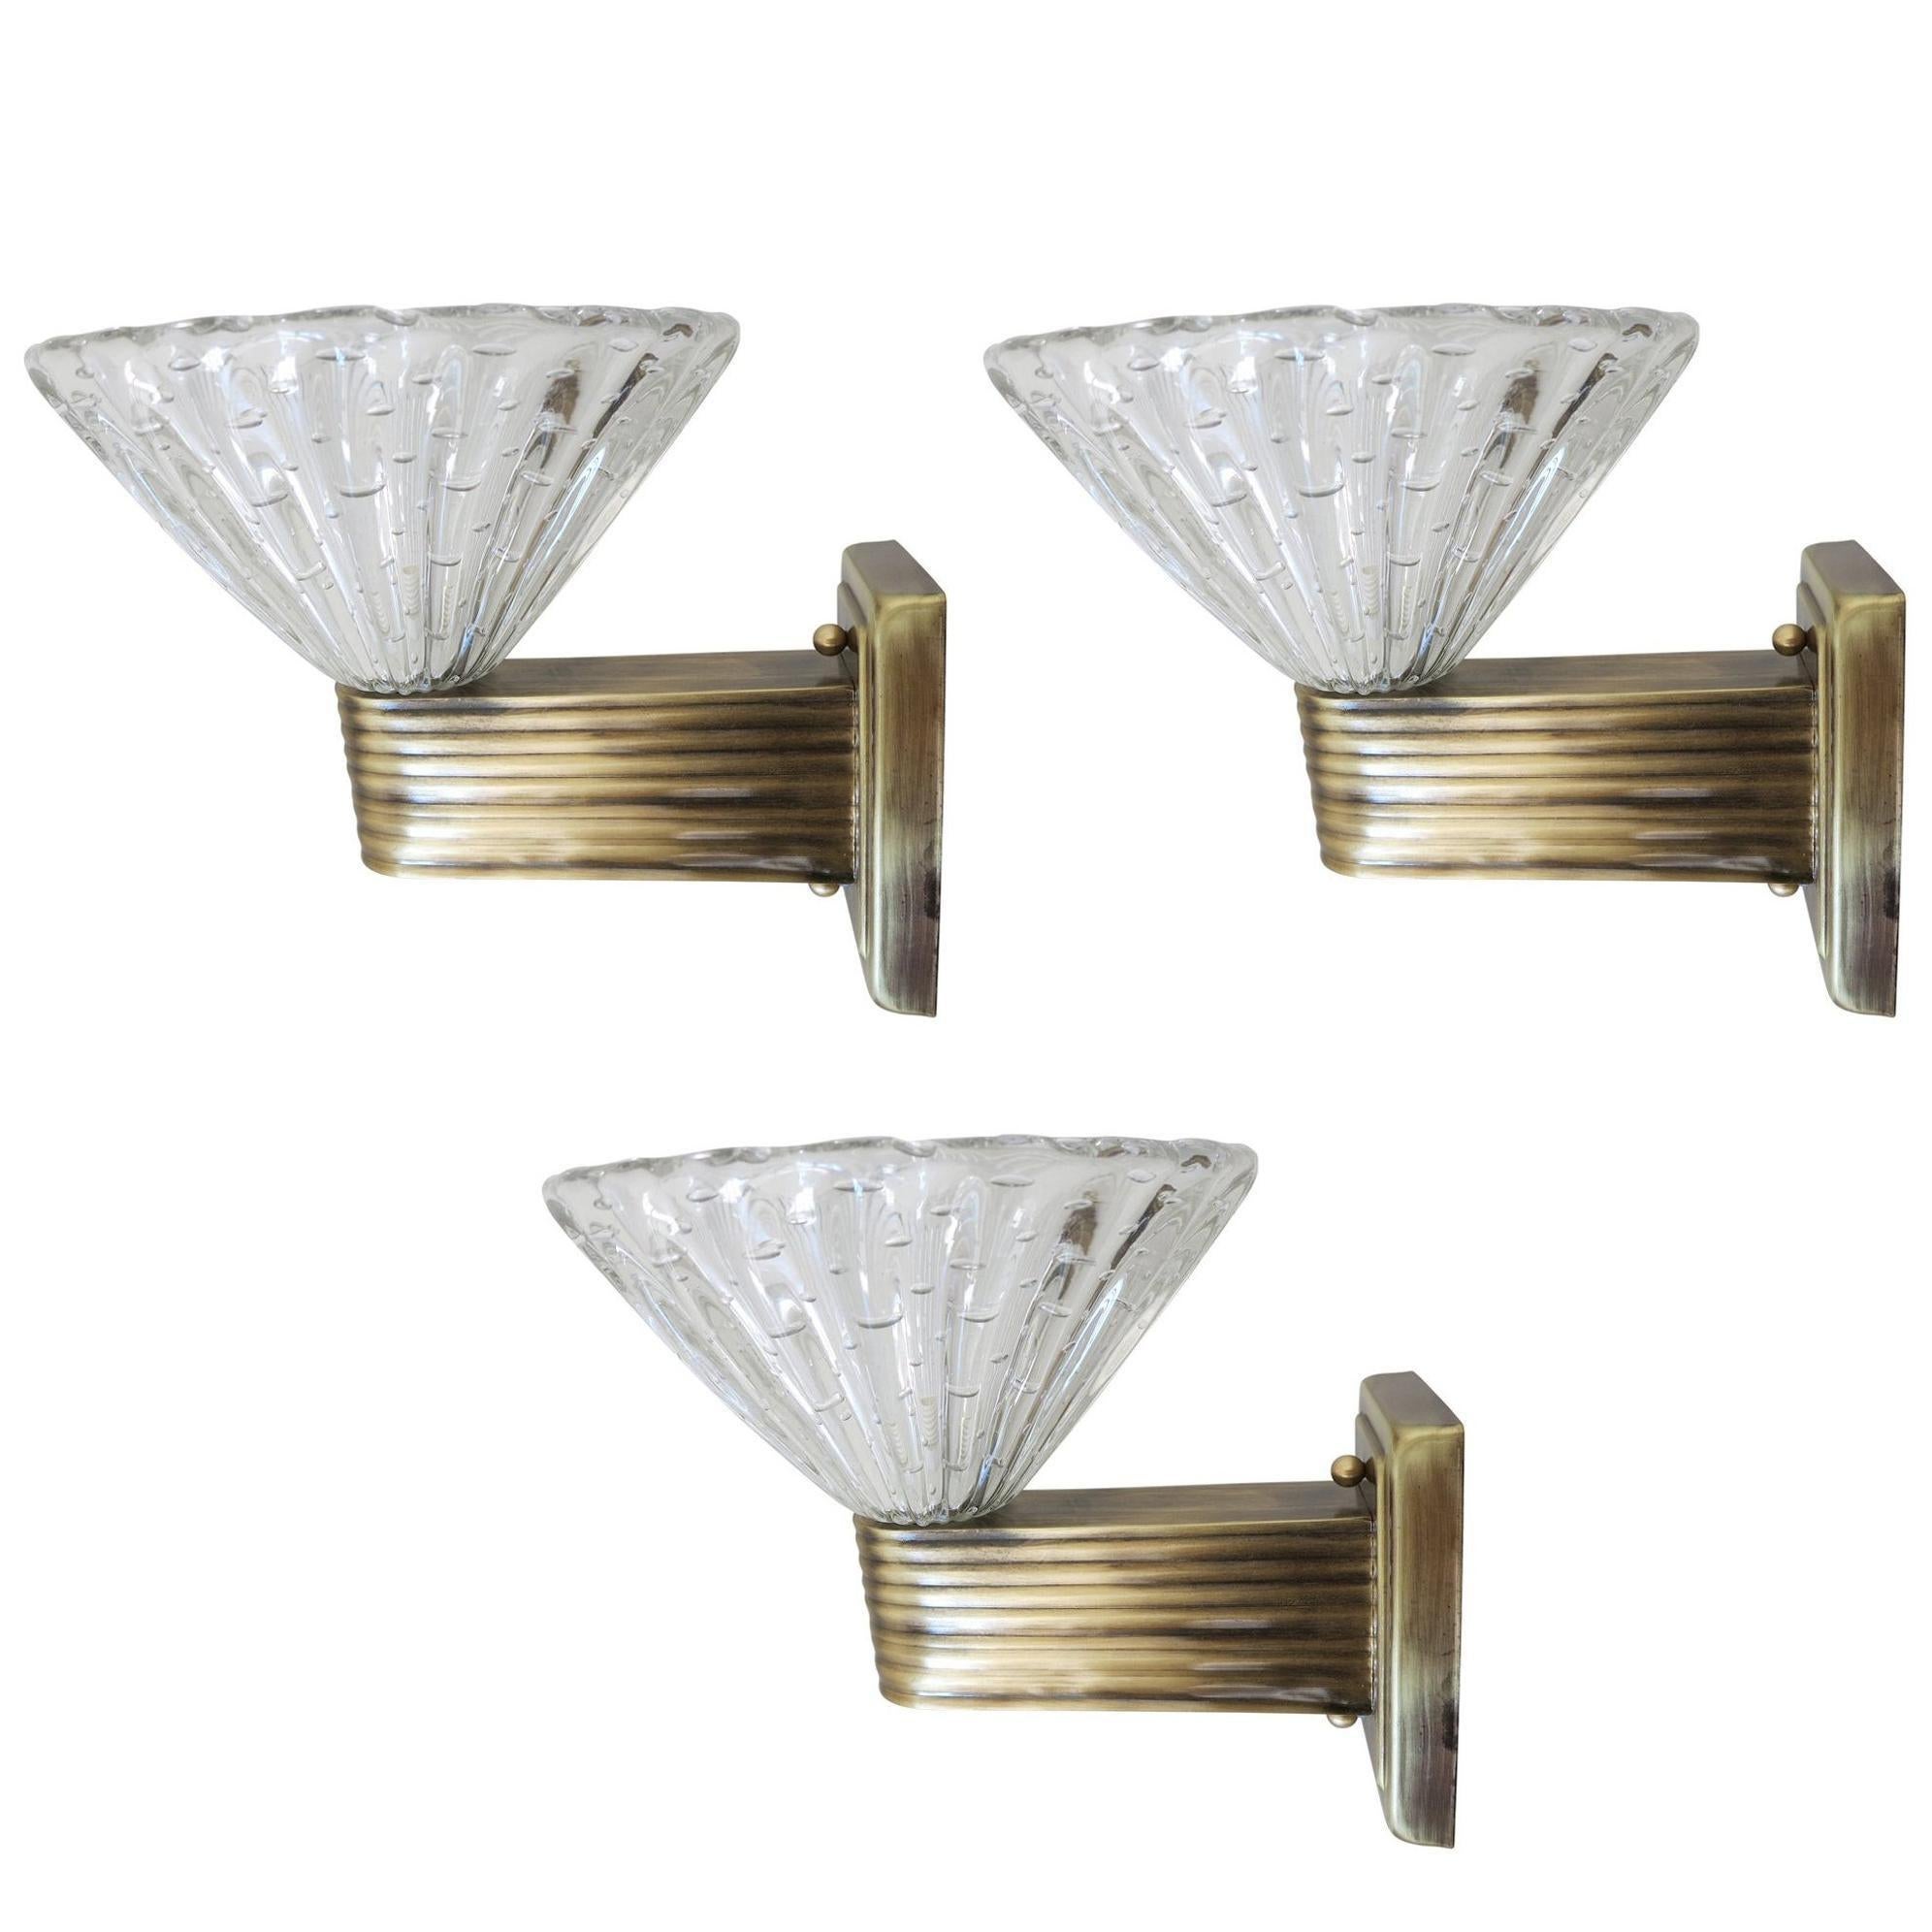 Set of Three Limited Edition Italian Sconces in the Style of Barovier & Toso